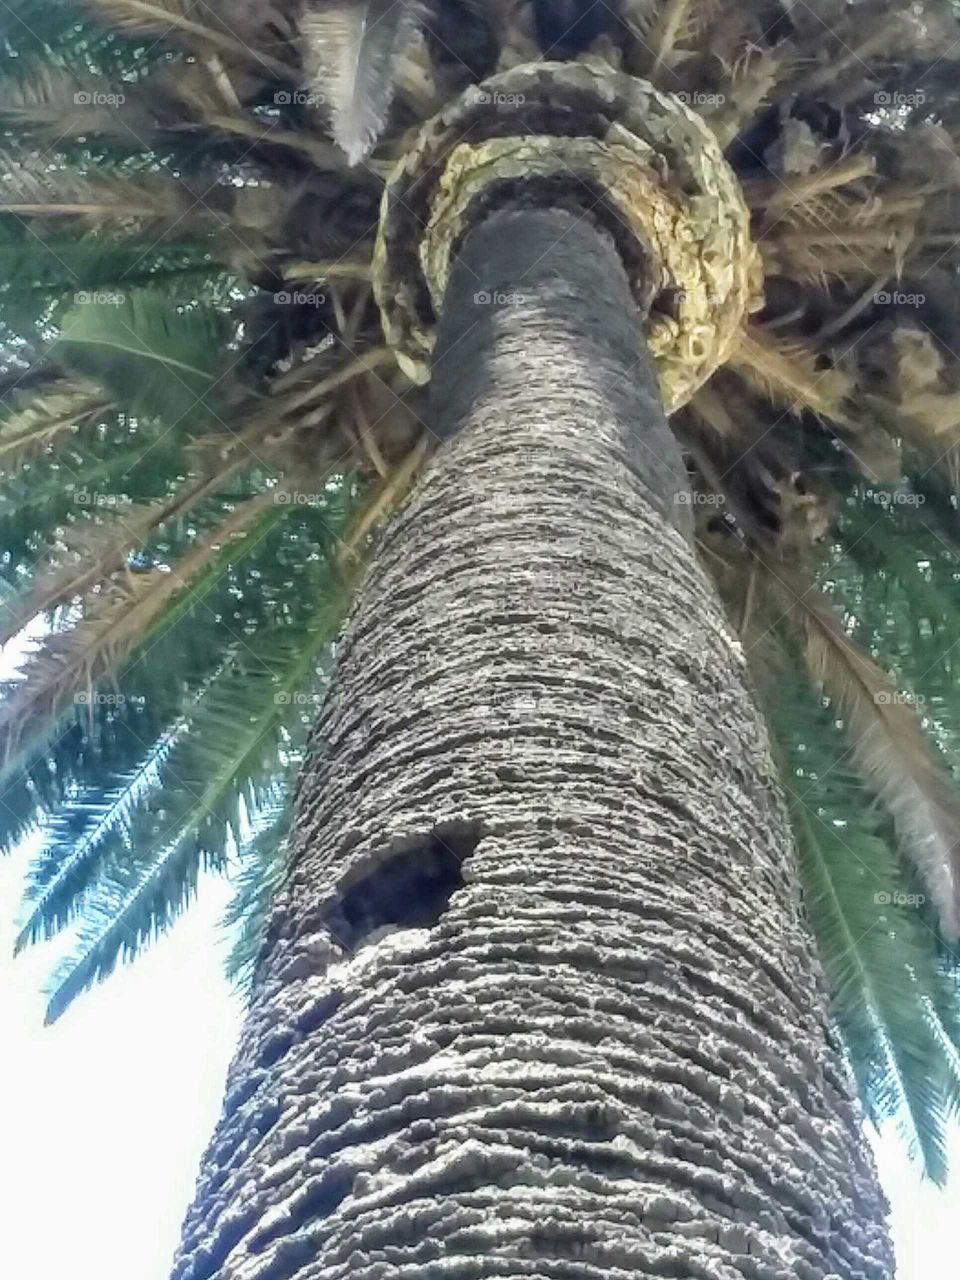 Looking Up Trunk of Palm Tree